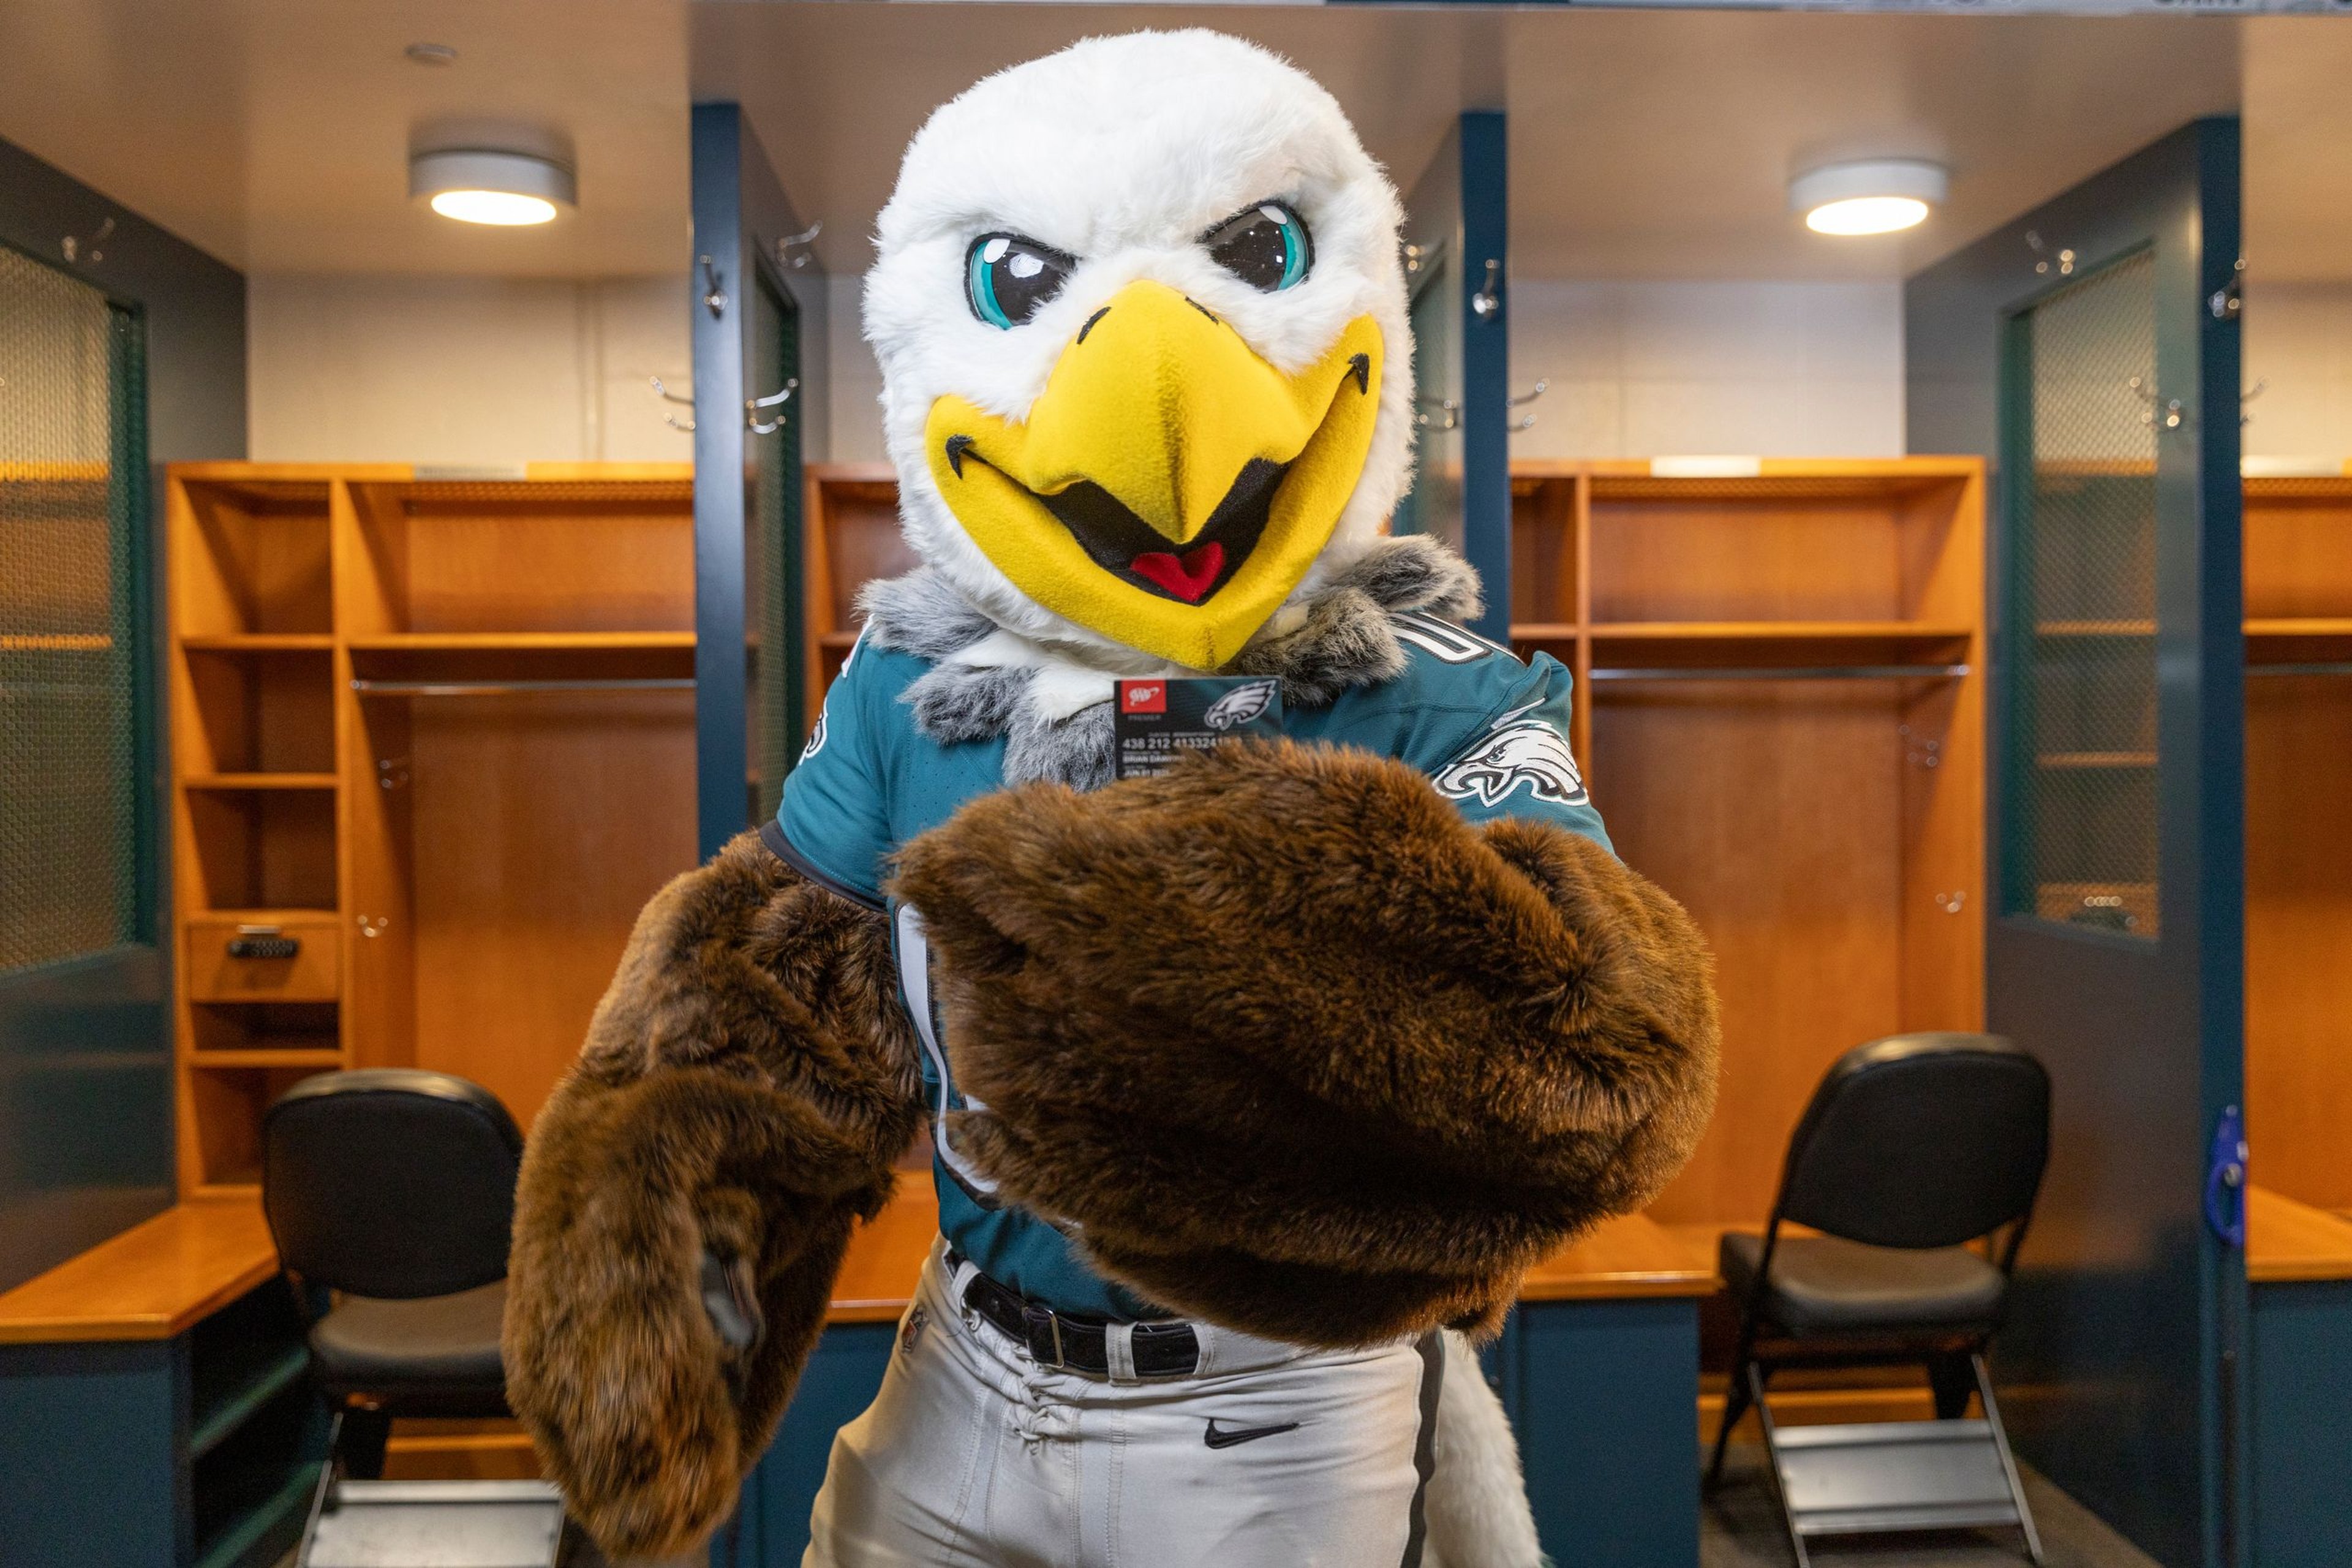 Philadelphia Eagles mascot Swoop holding Triple A Eagles MVP card in front of lockers